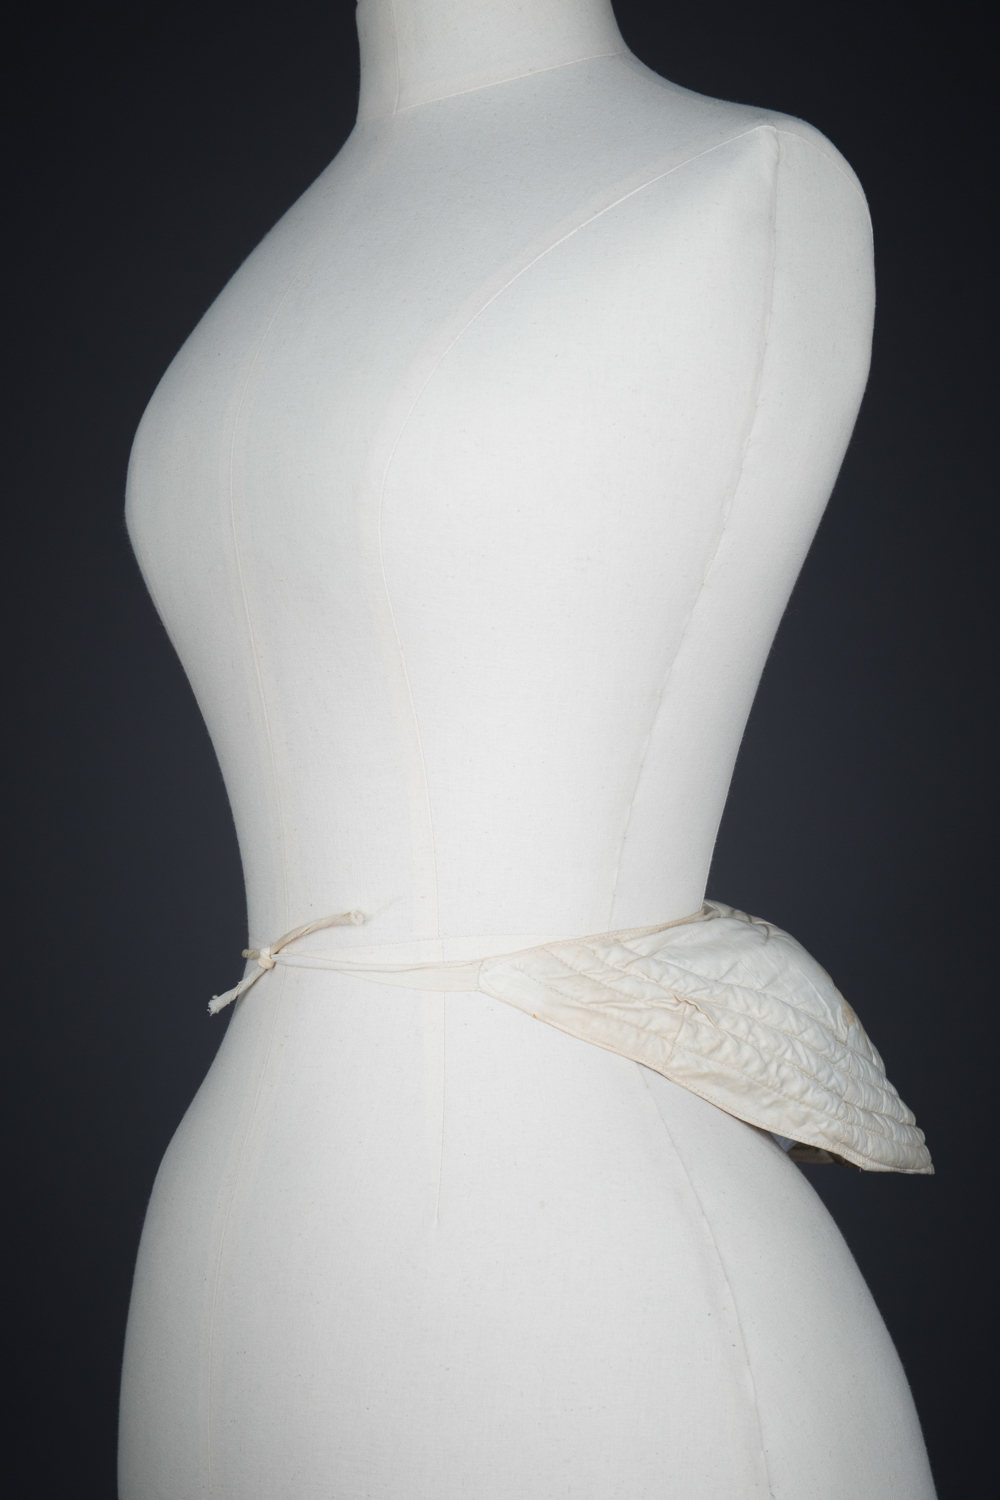 'The Scott' Ventilated Hip Pad & Bustle by Charles H. Scott, c. 1905, USA. The Underpinnings Museum. Photography by Tigz Rice.